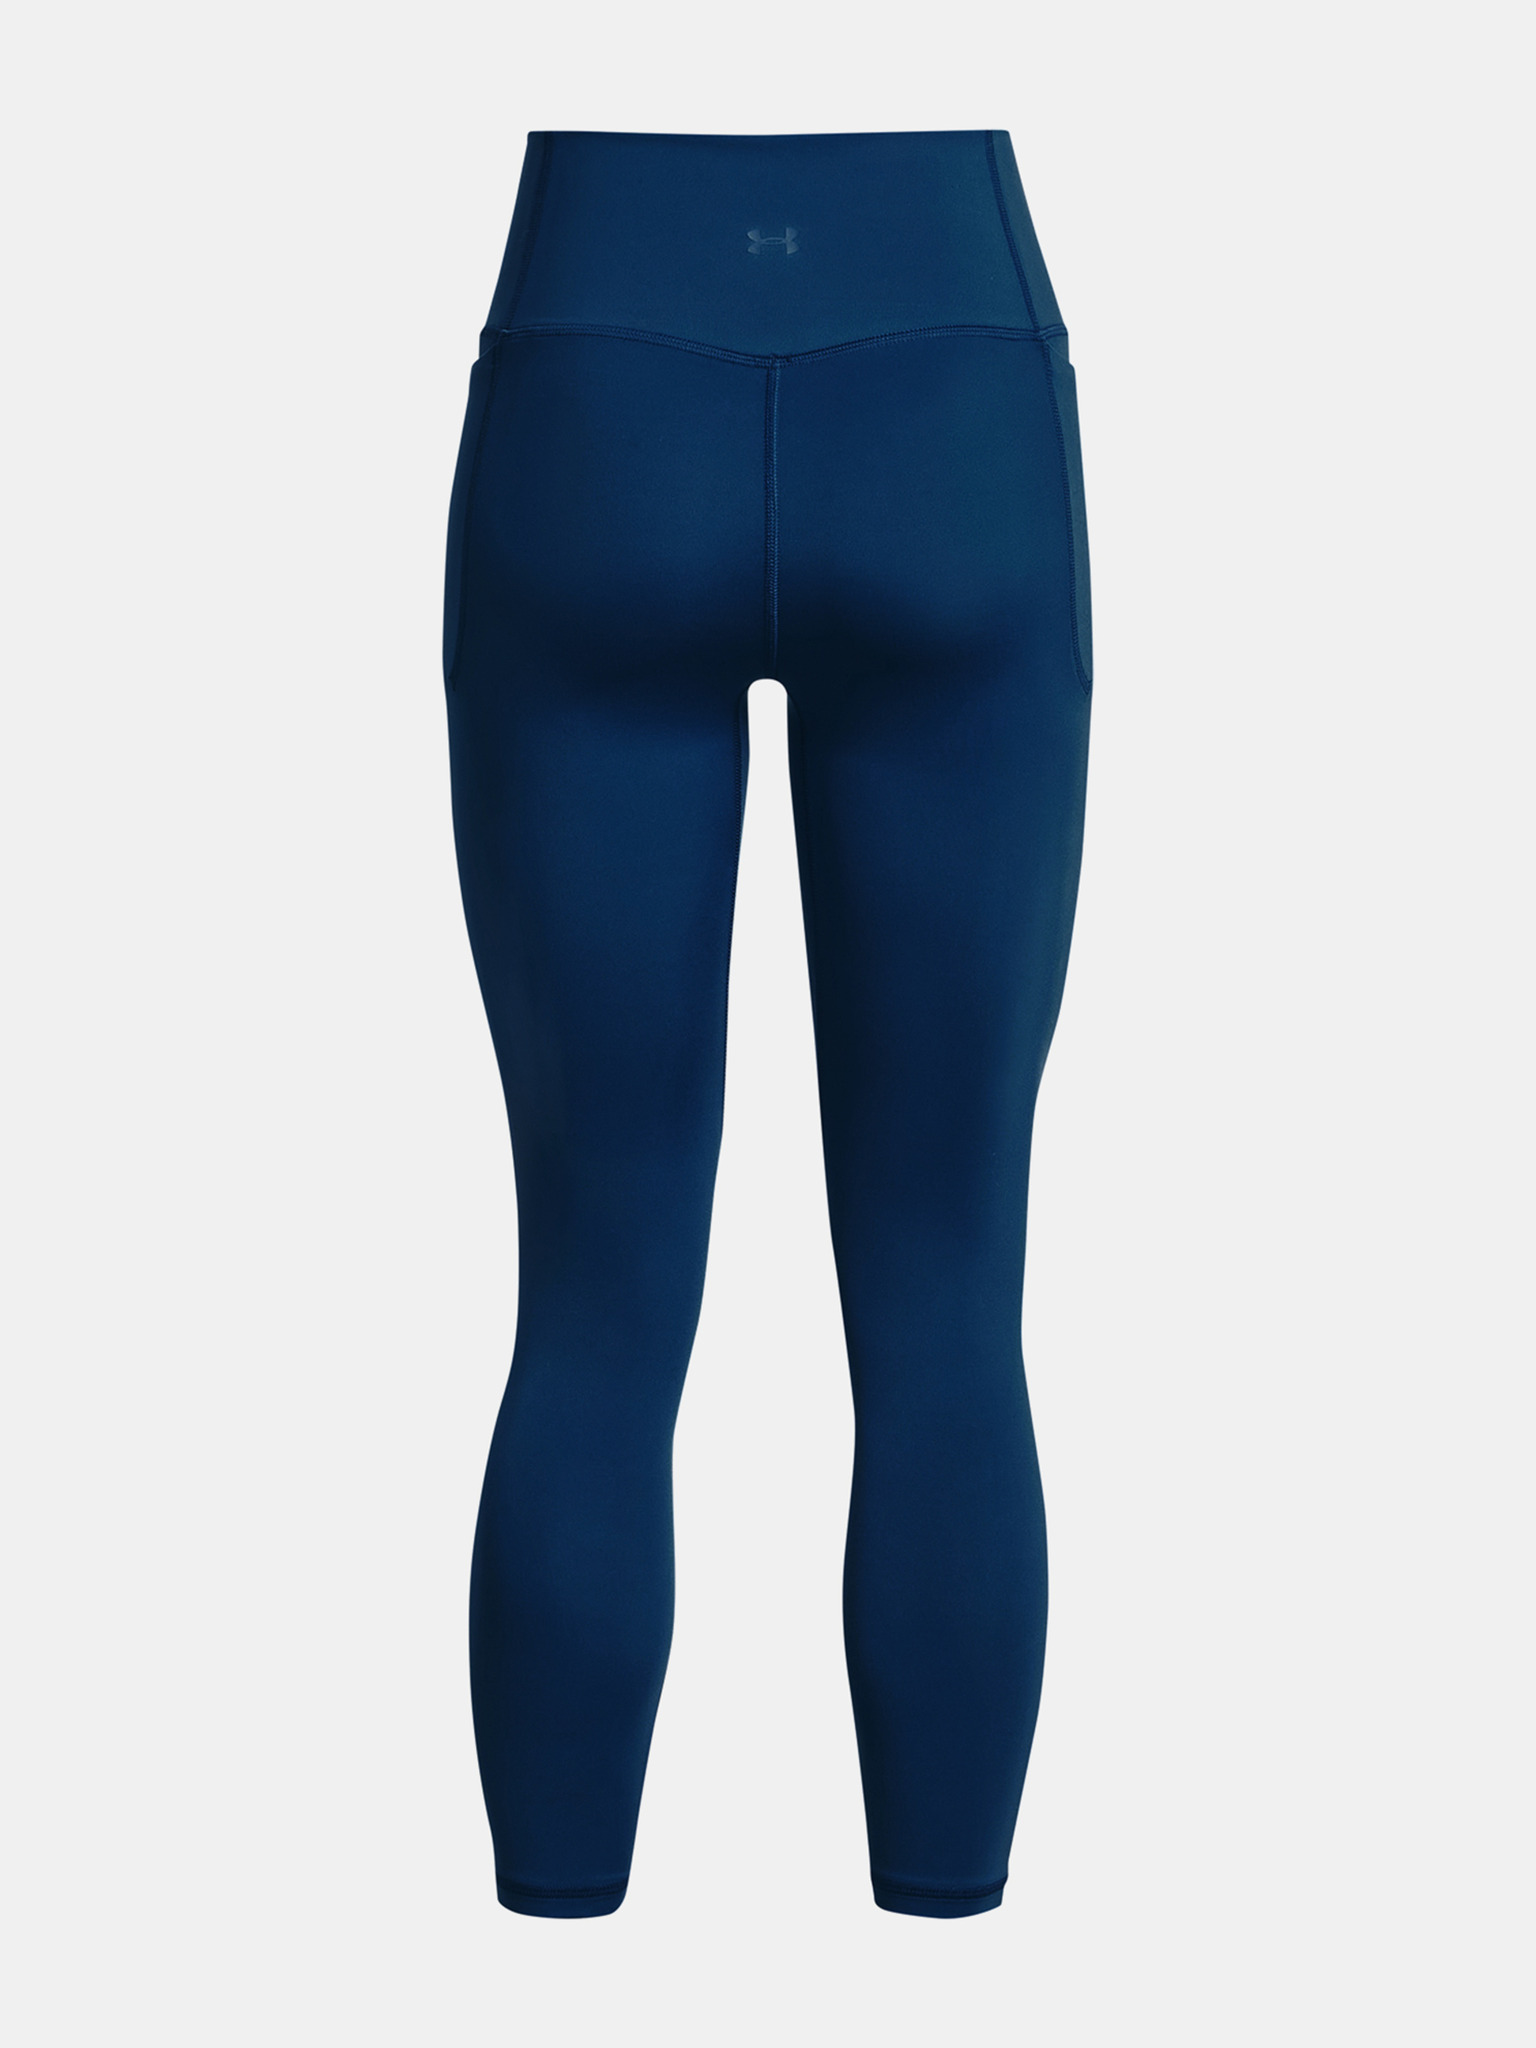 New Women's XLARGE Under Armour Blue Meridian High Rise Ankle Leggings